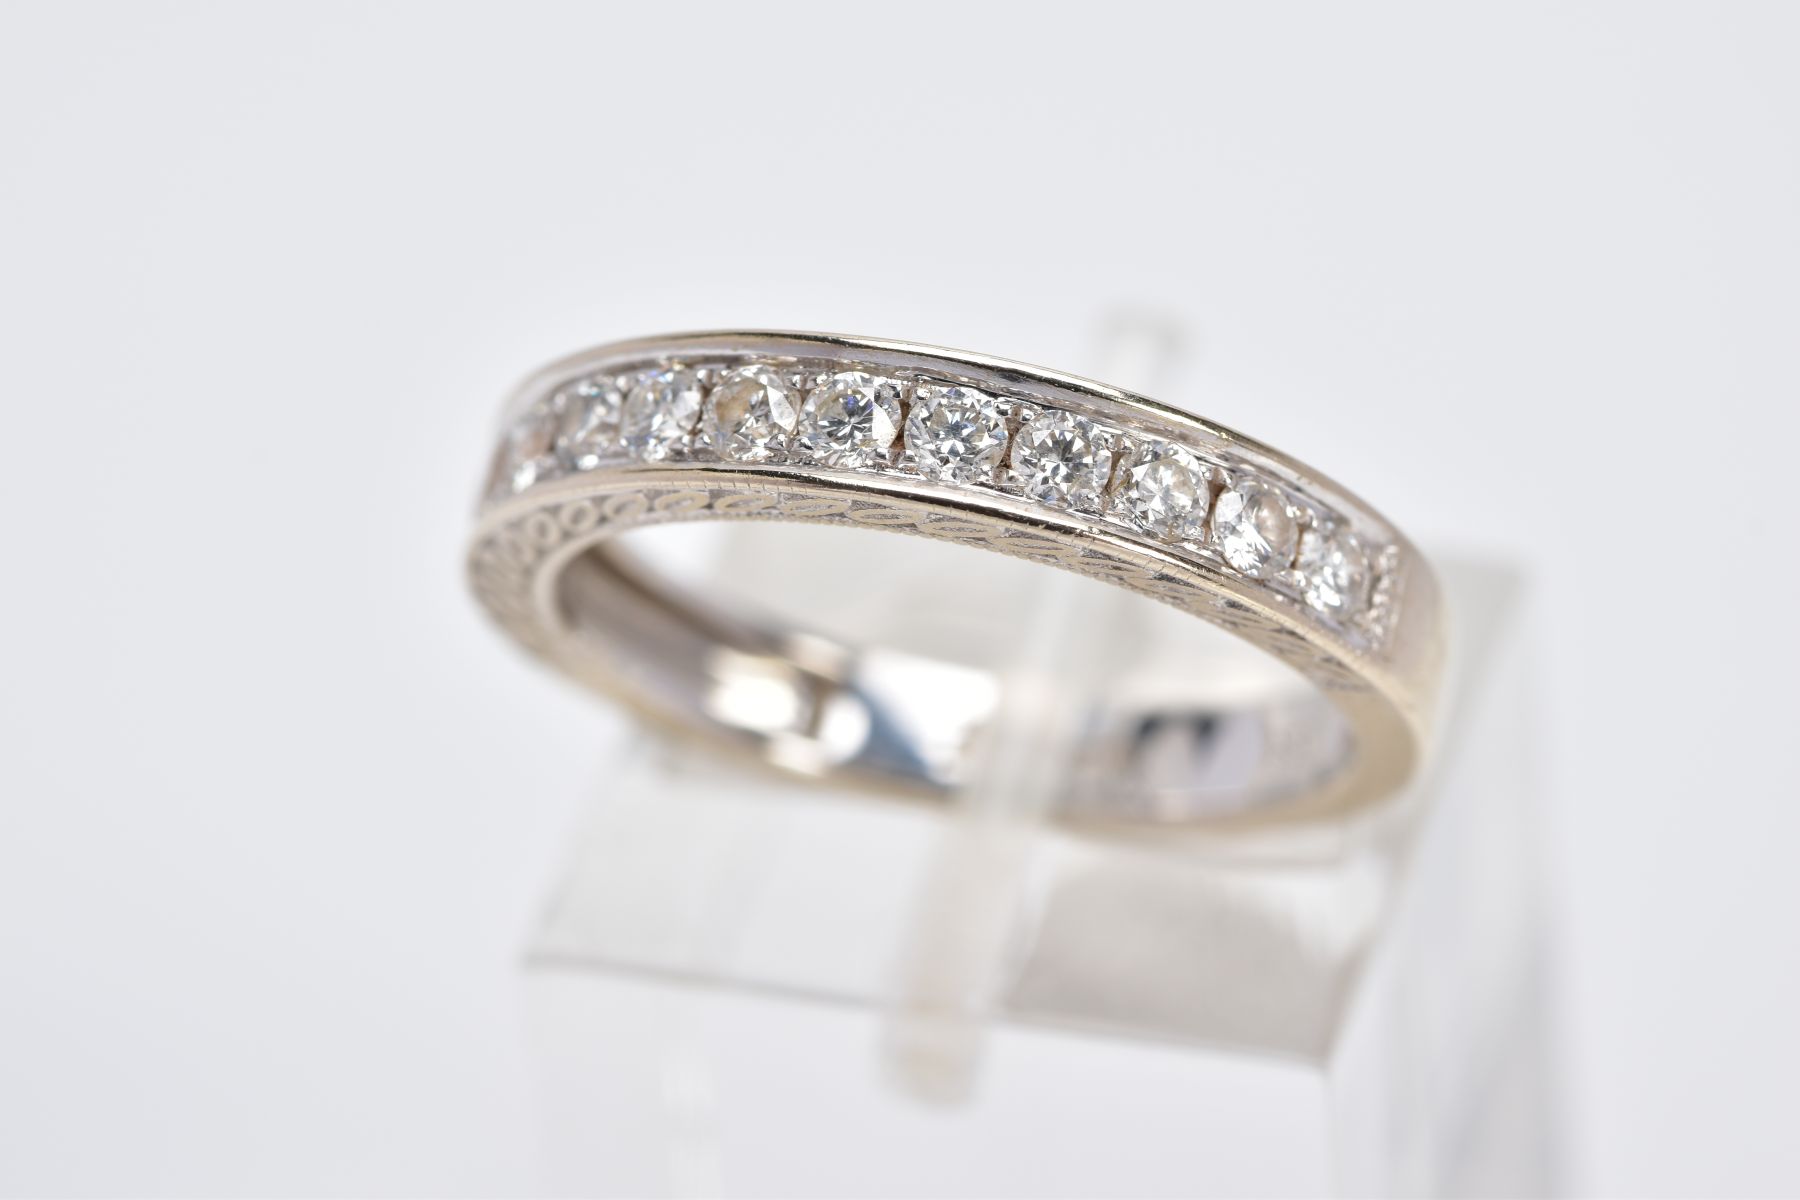 AN 18CT WHITE GOLD DIAMOND HALF ETERNITY RING, designed with a row of round brilliant cut